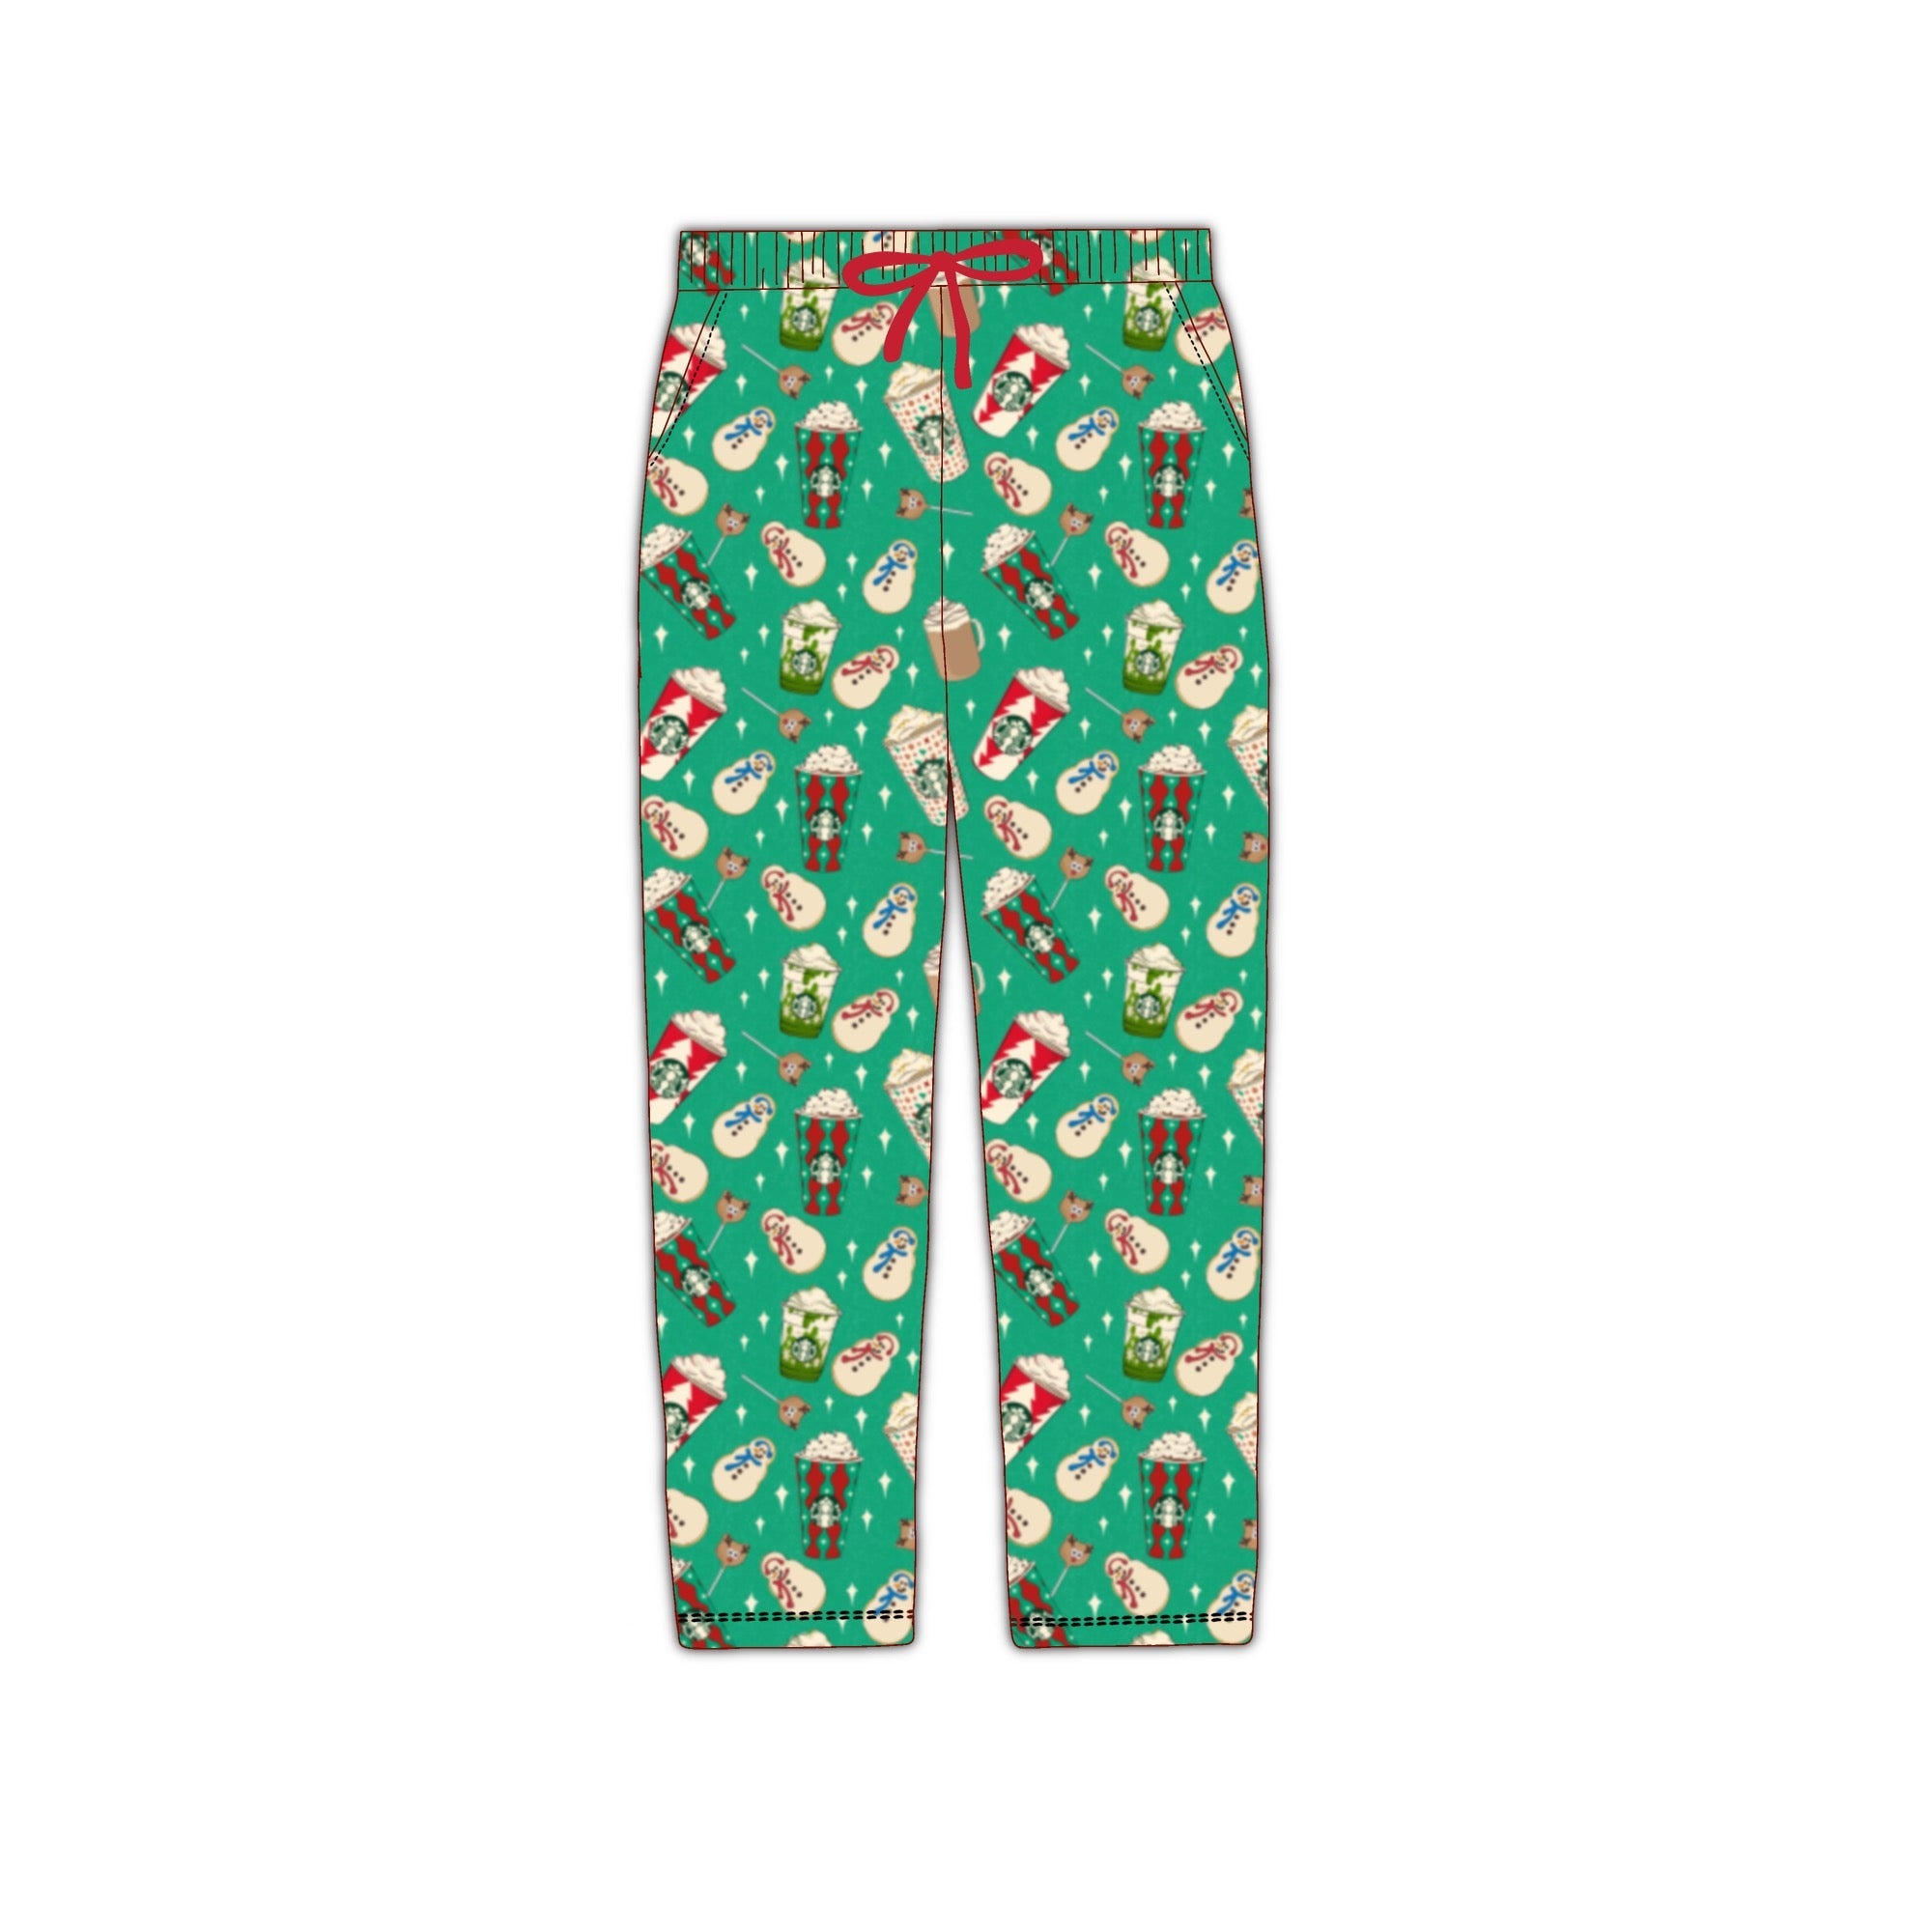 BAMBOO i love Christmas a latte adult unisex relaxed pajama PANTS